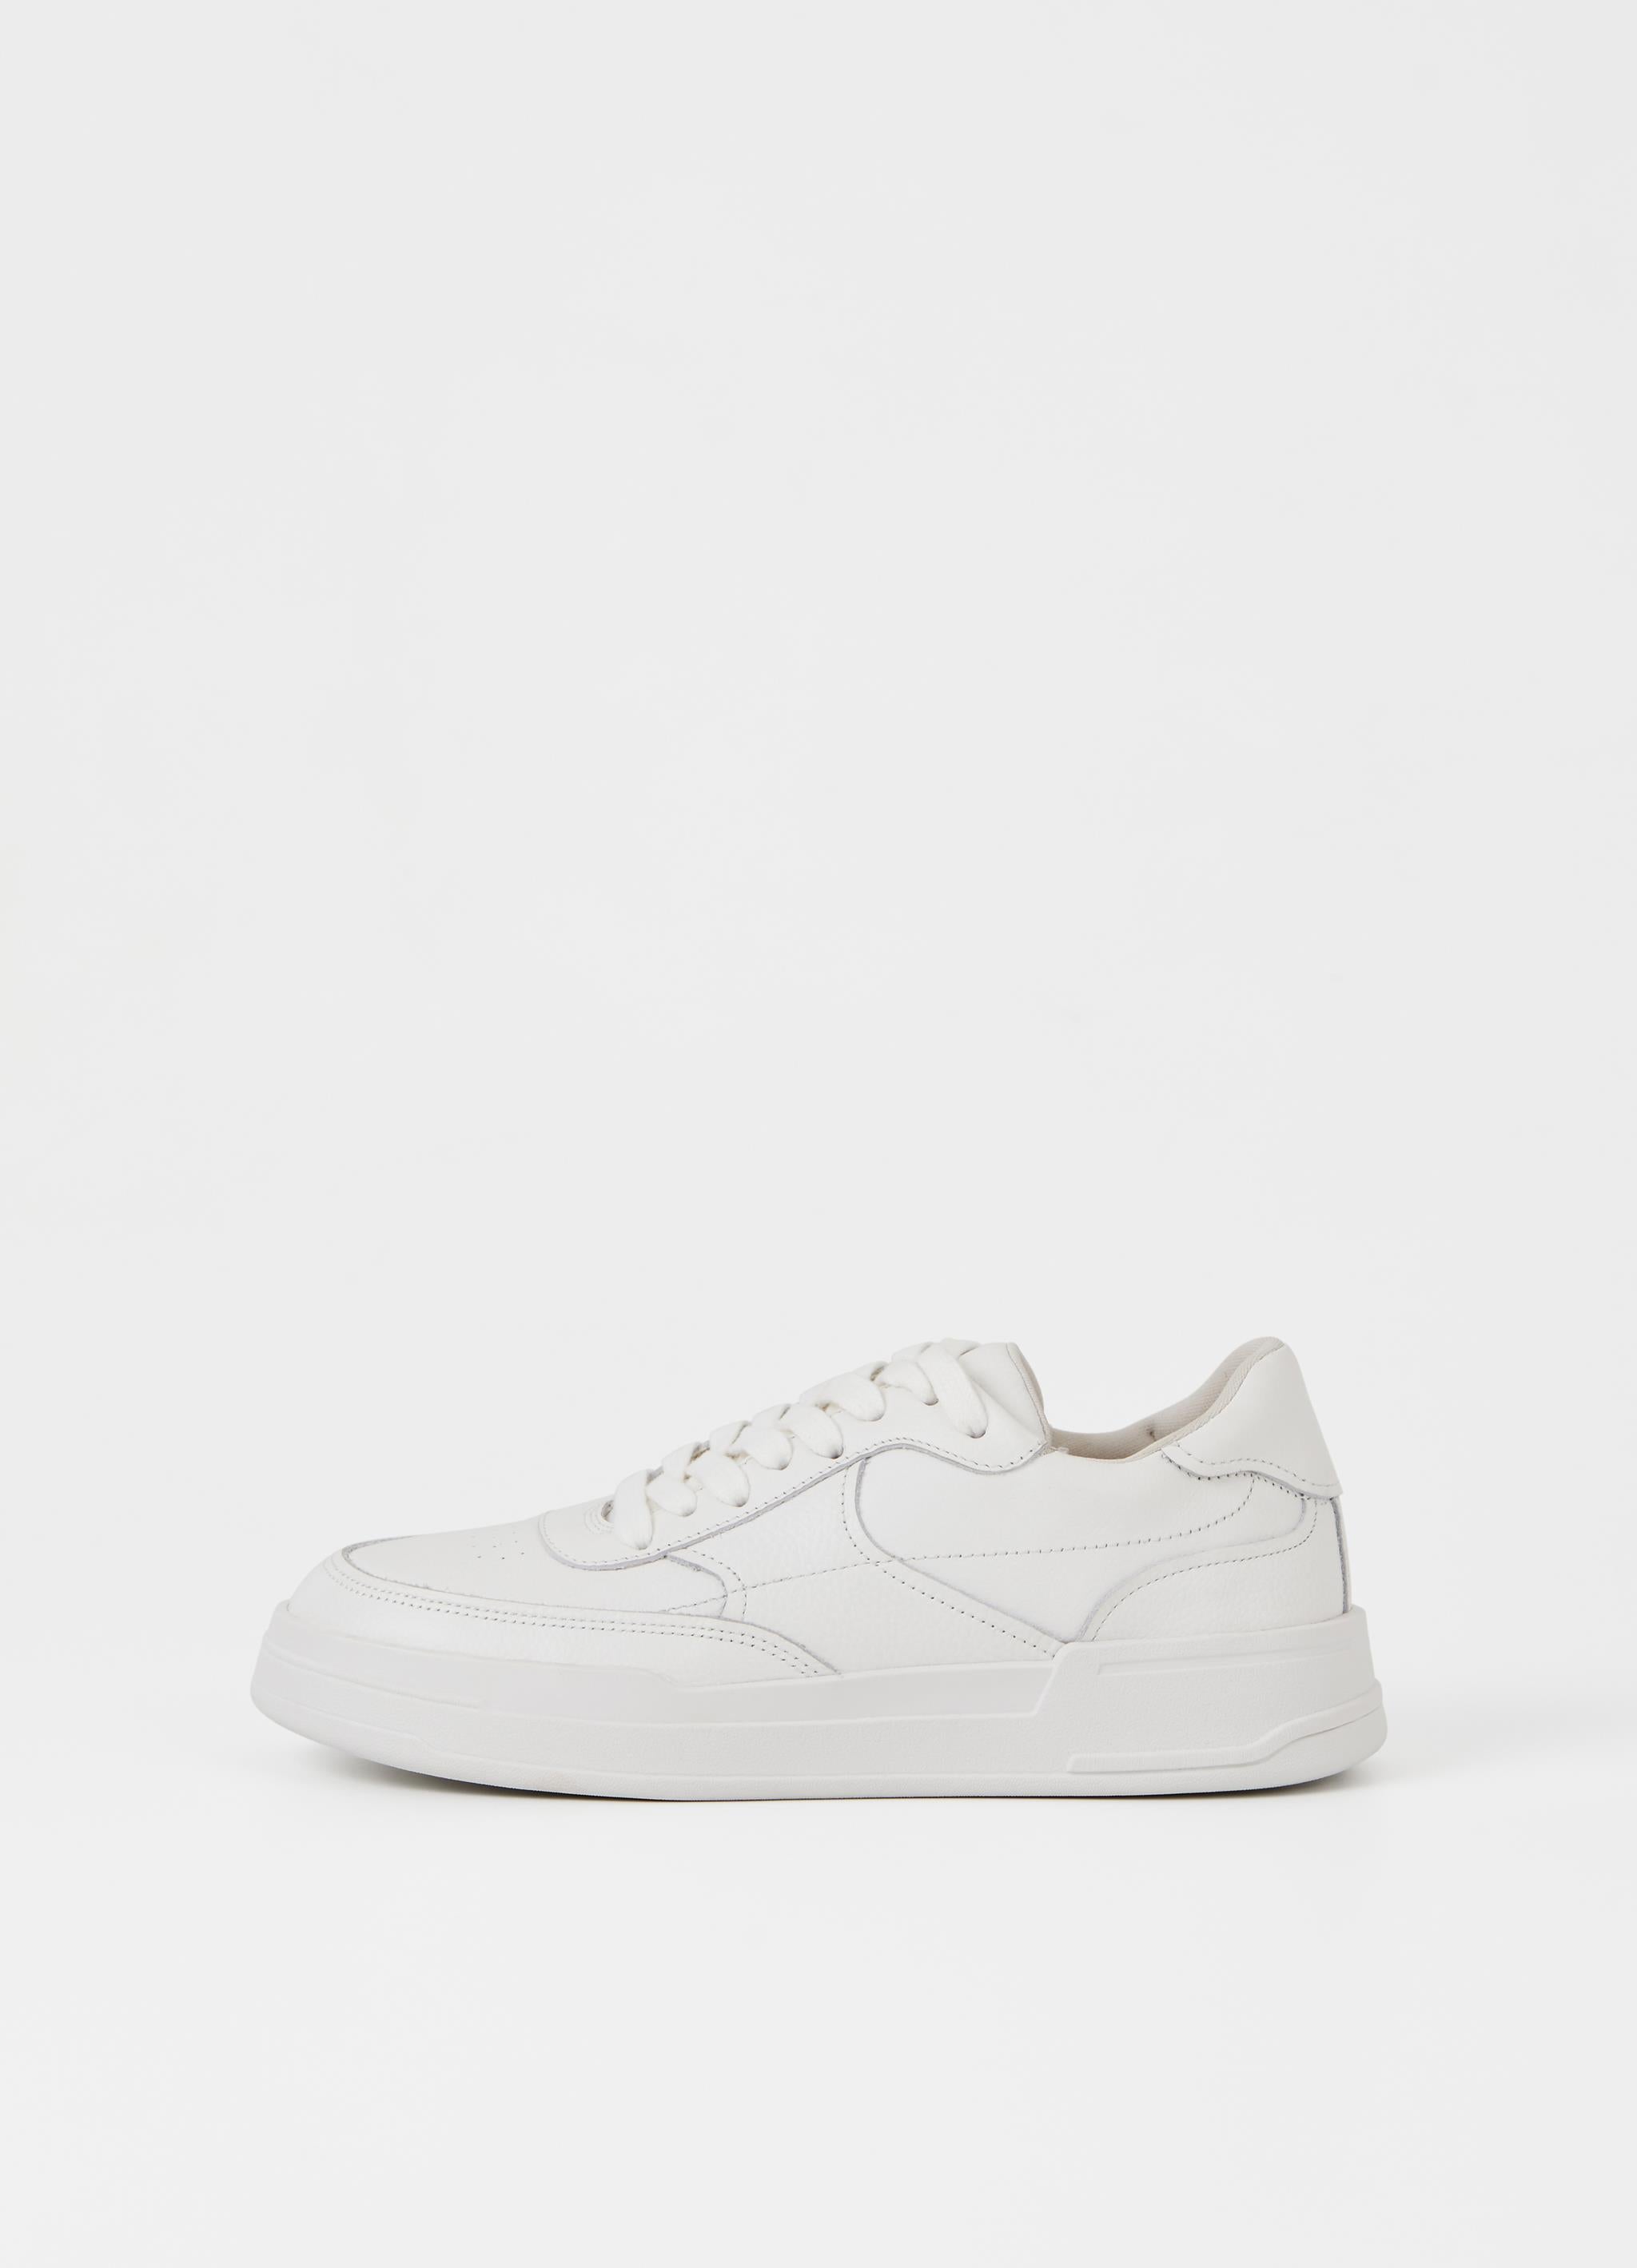 White layered leather trainers with white laces